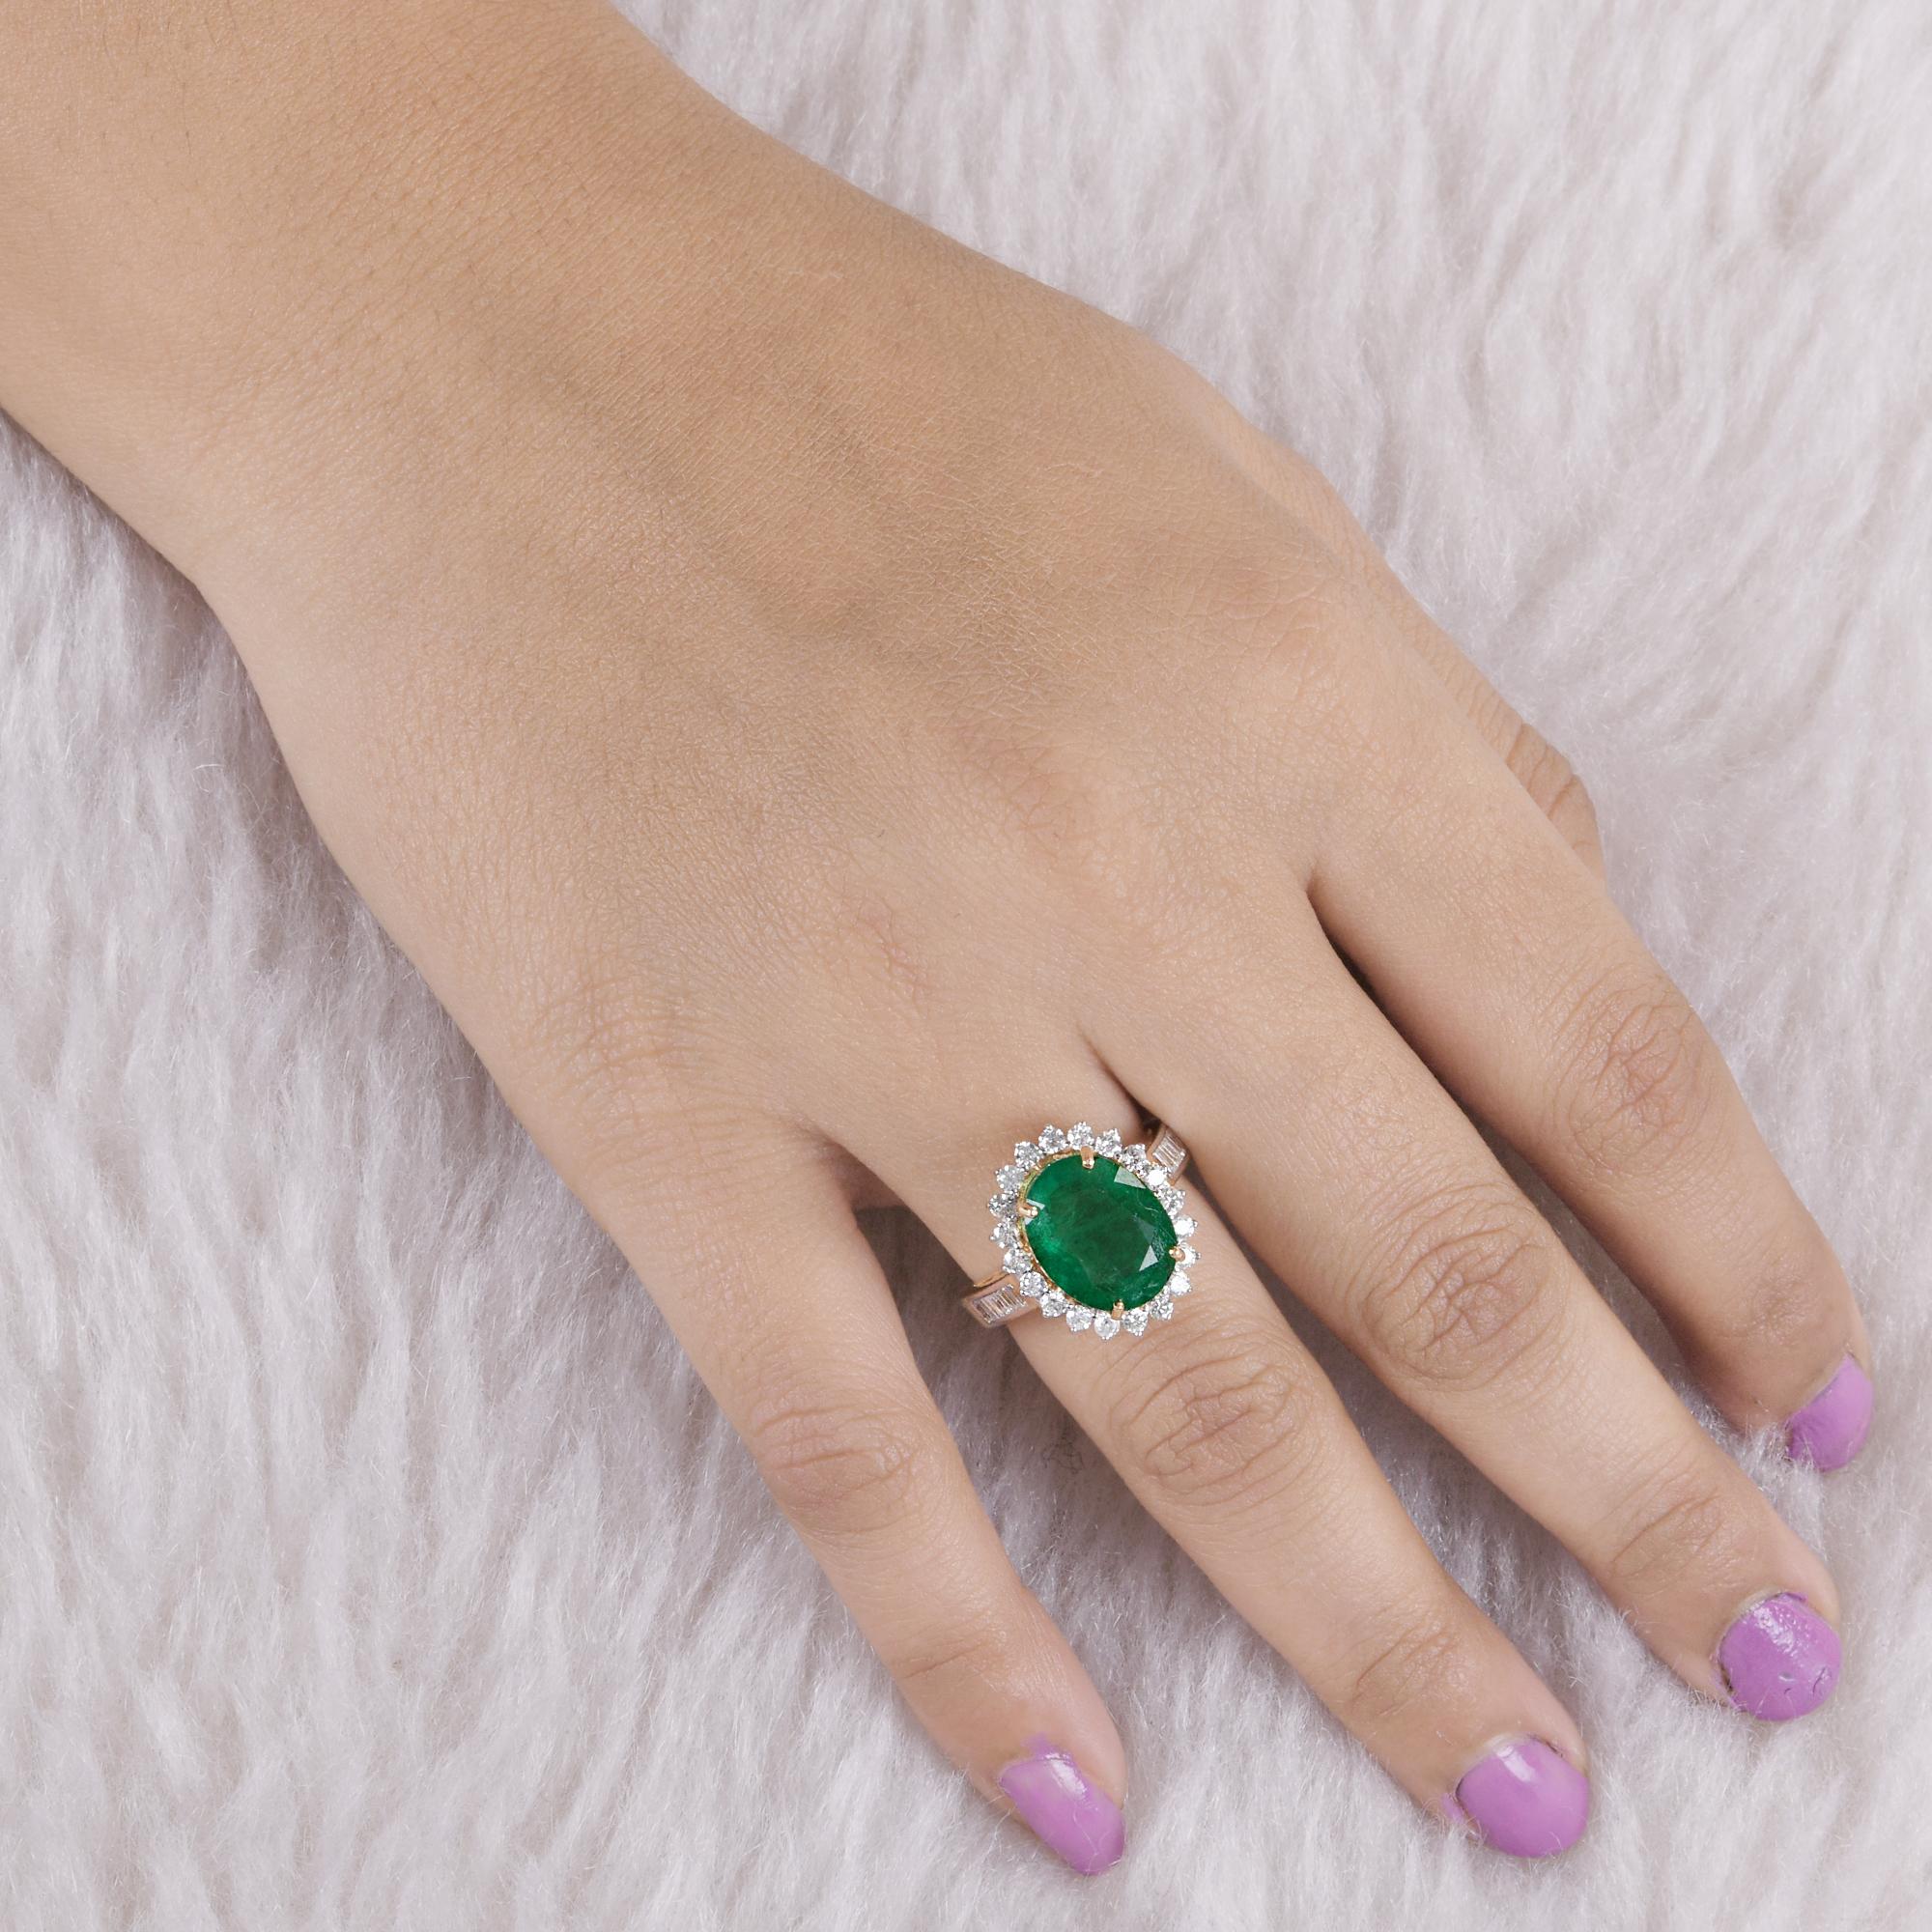 For Sale:  Real Oval Zambian Emerald Gemstone Cocktail Ring Diamond 18k Yellow Gold Jewelry 5